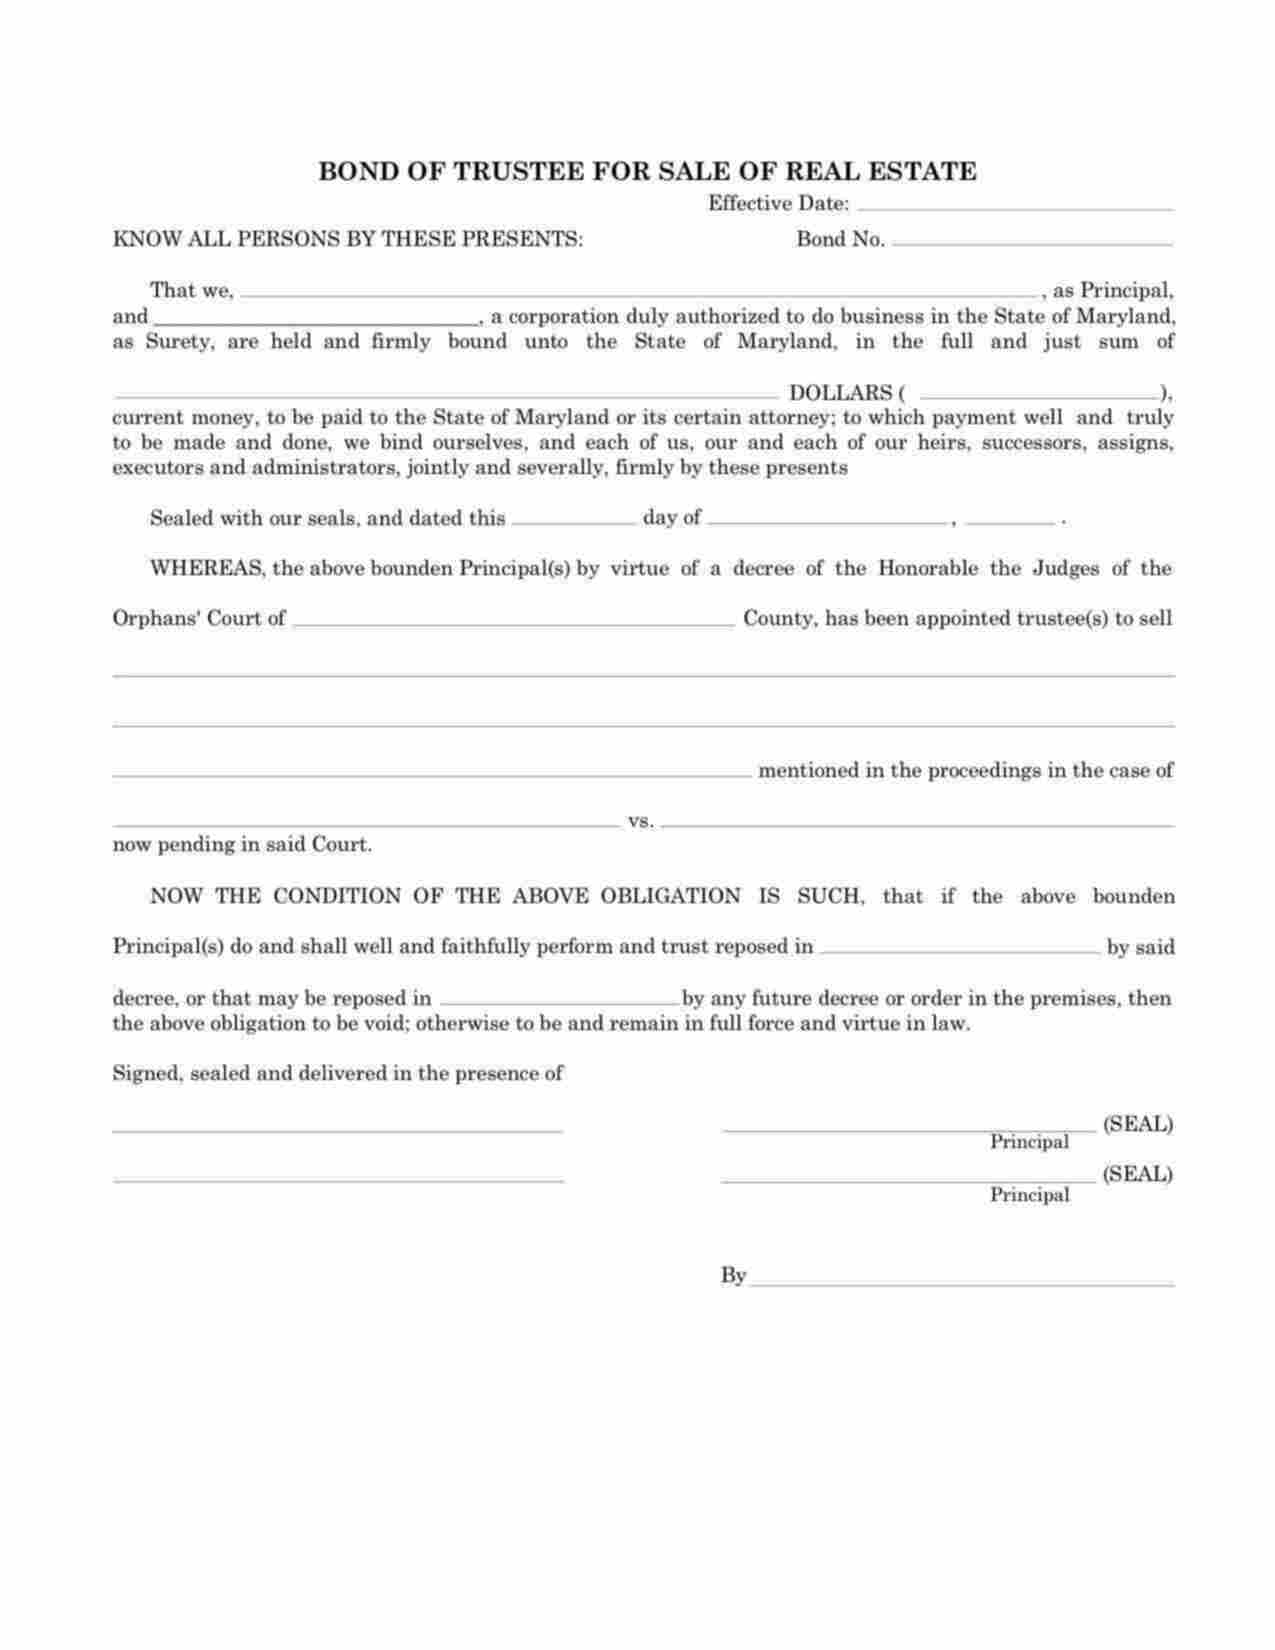 Maryland Trustee for Sale of Real Estate Bond Form